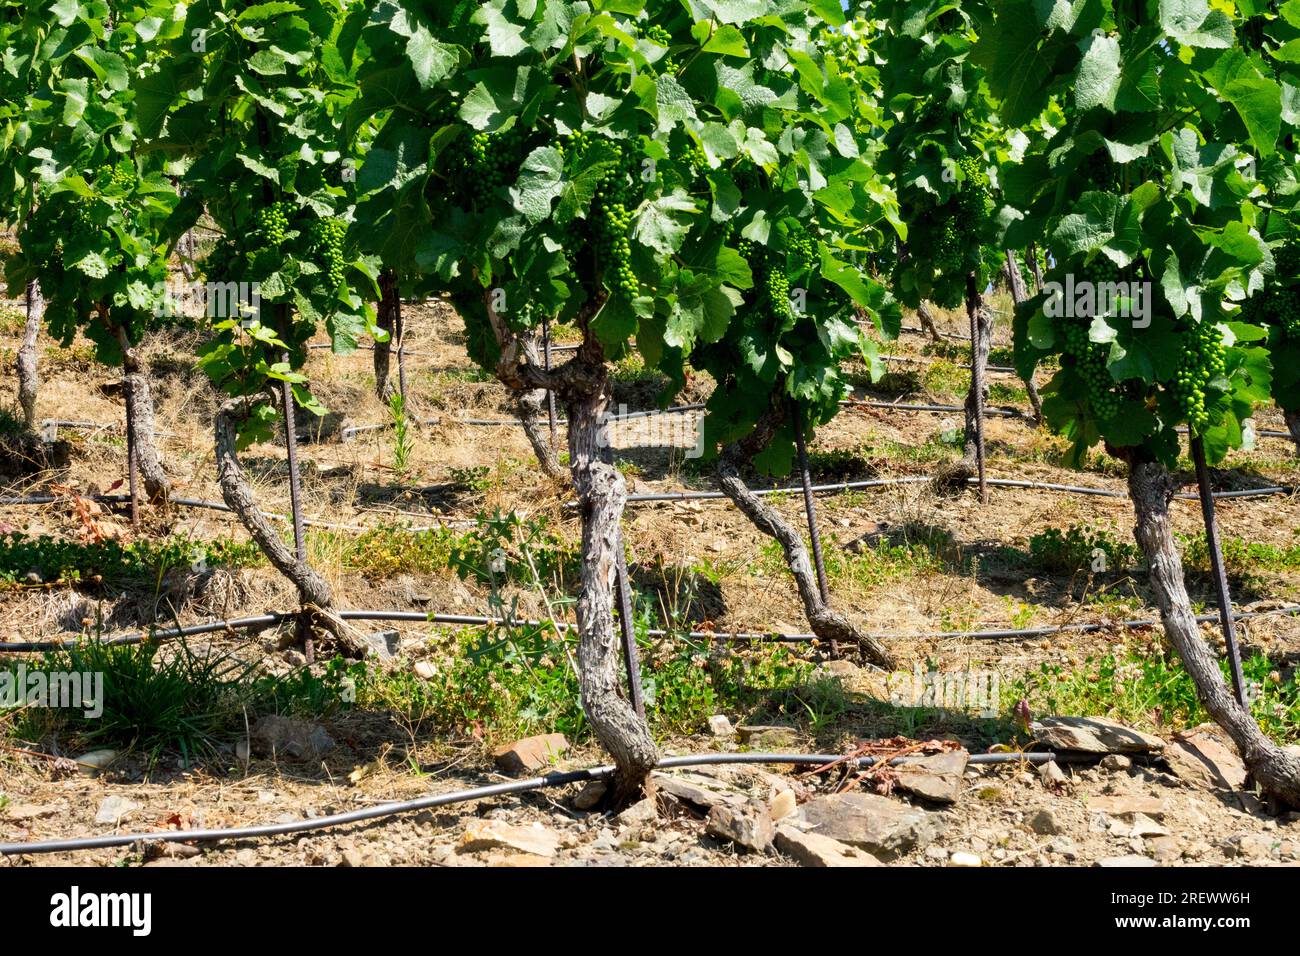 Drip irrigation in vineyard water distribution with hoses Stock Photo